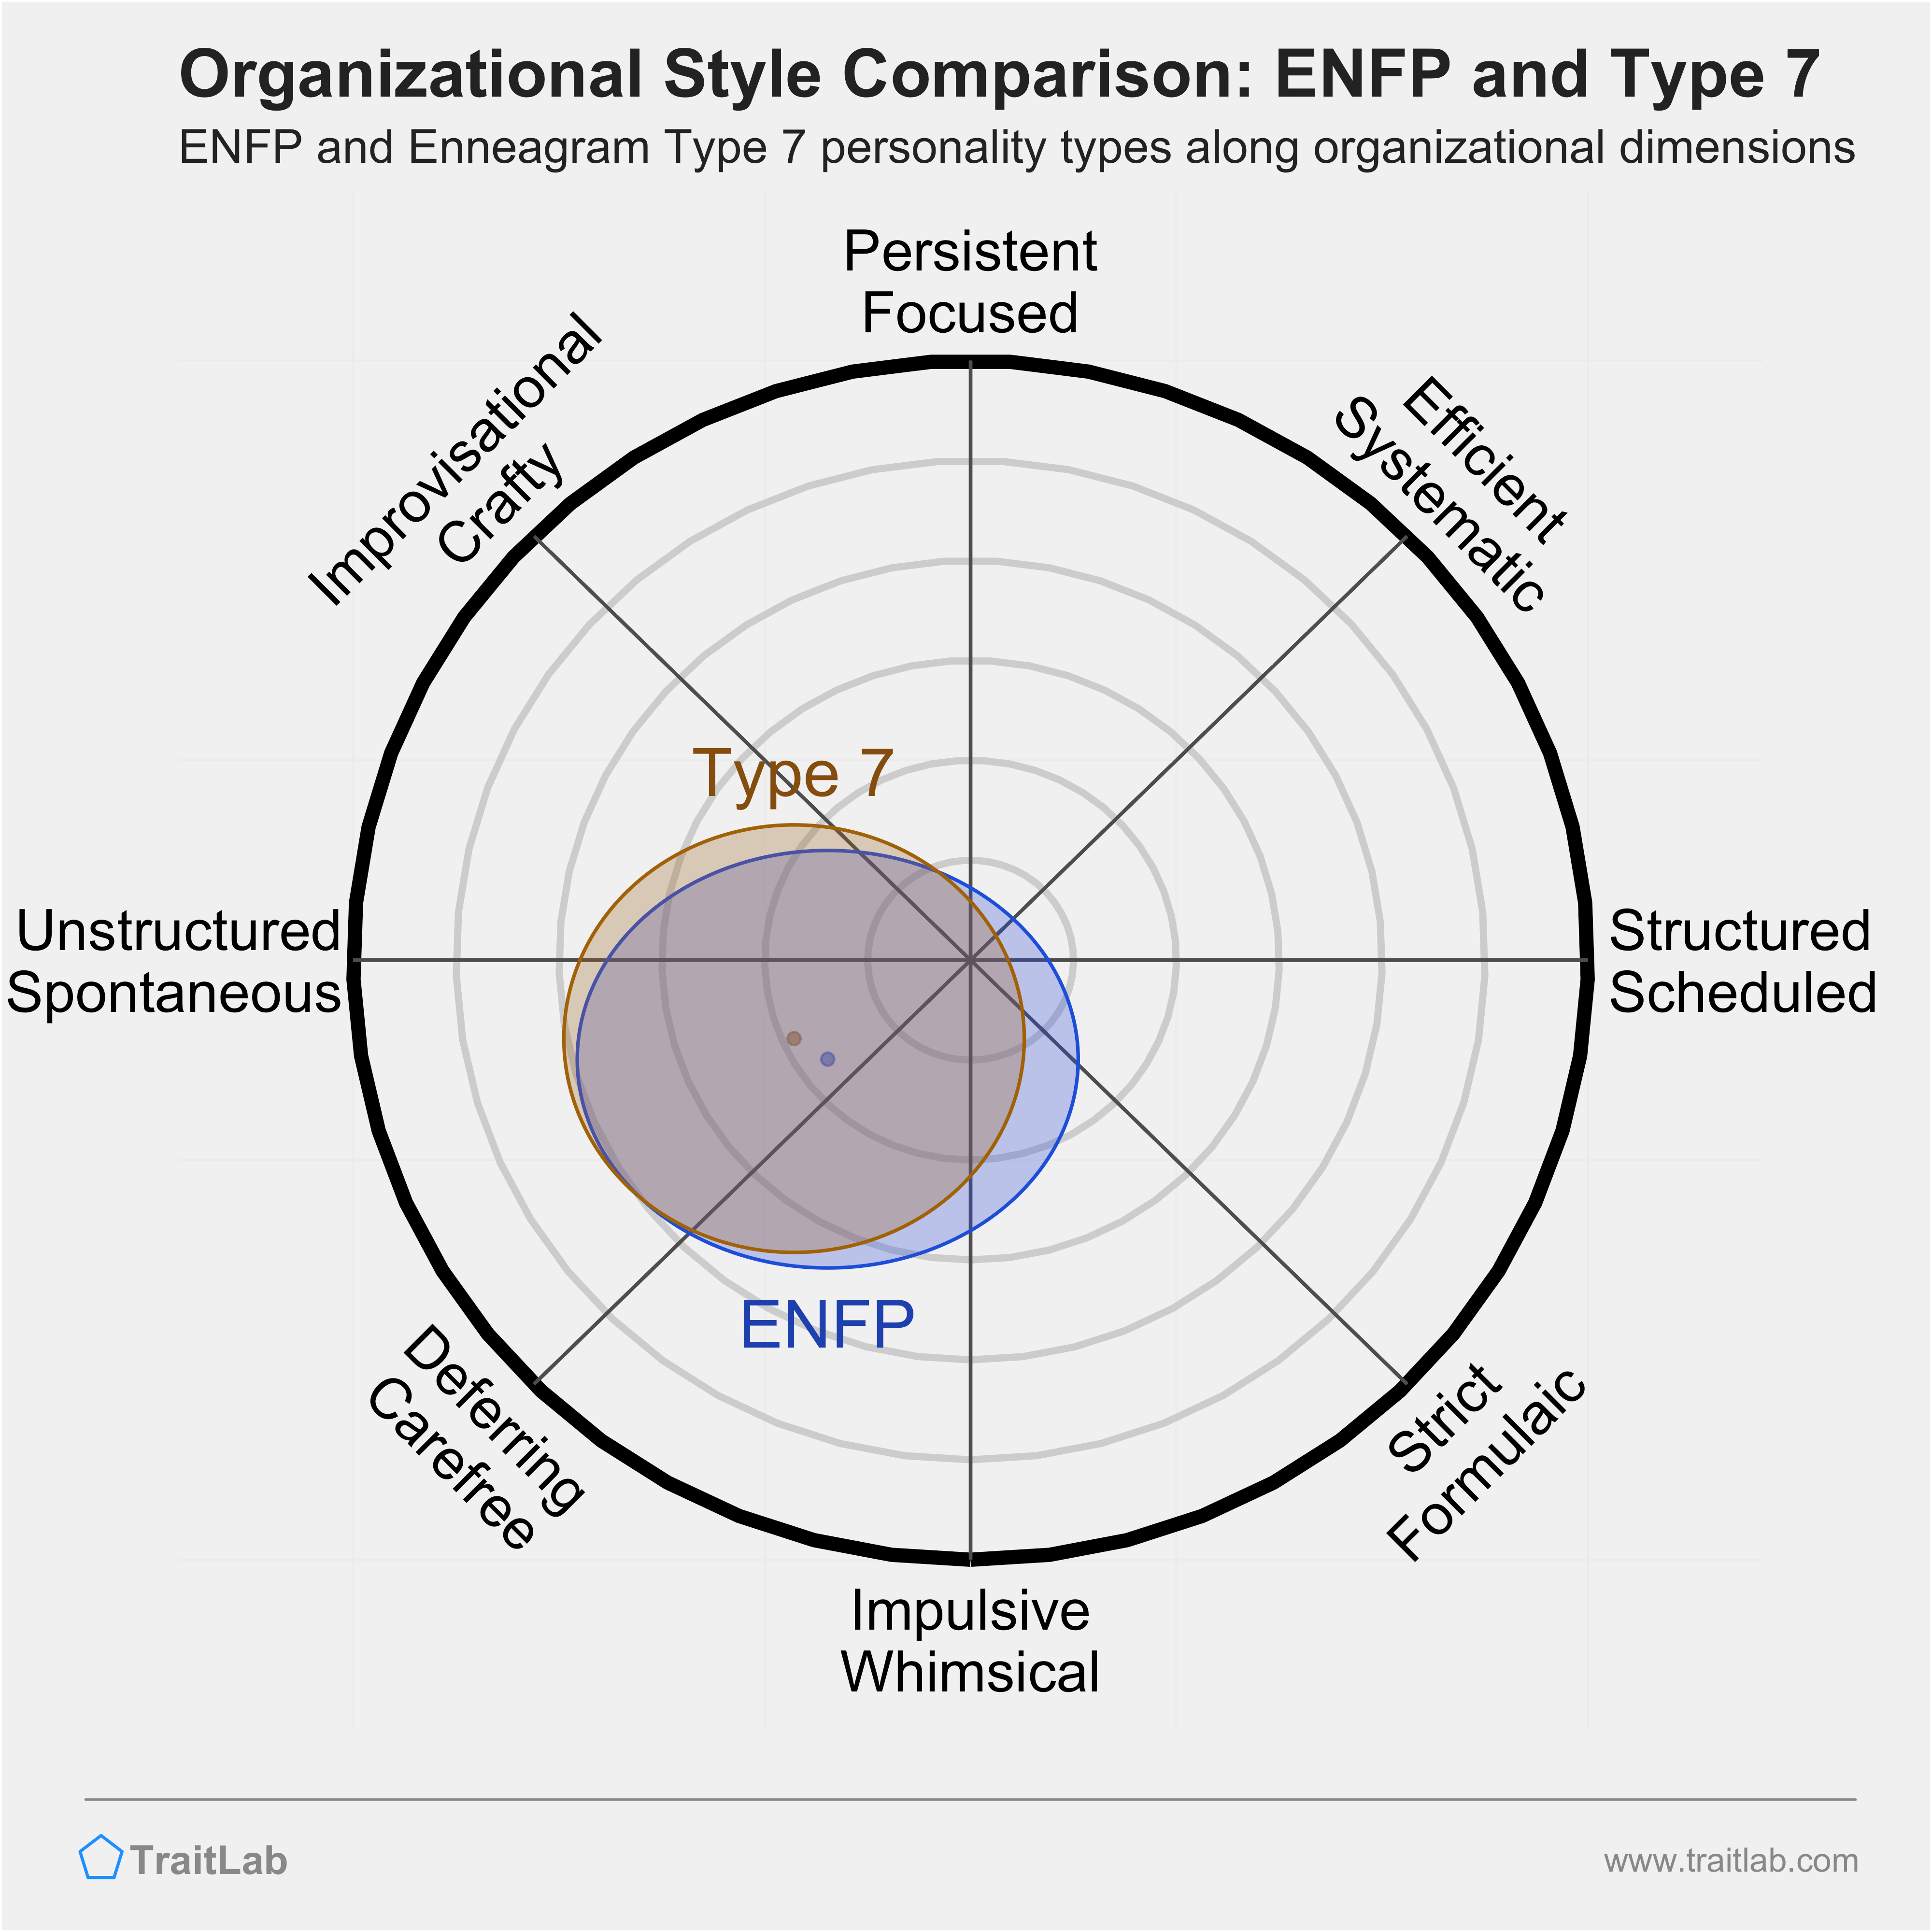 ENFP and Type 7 comparison across organizational dimensions